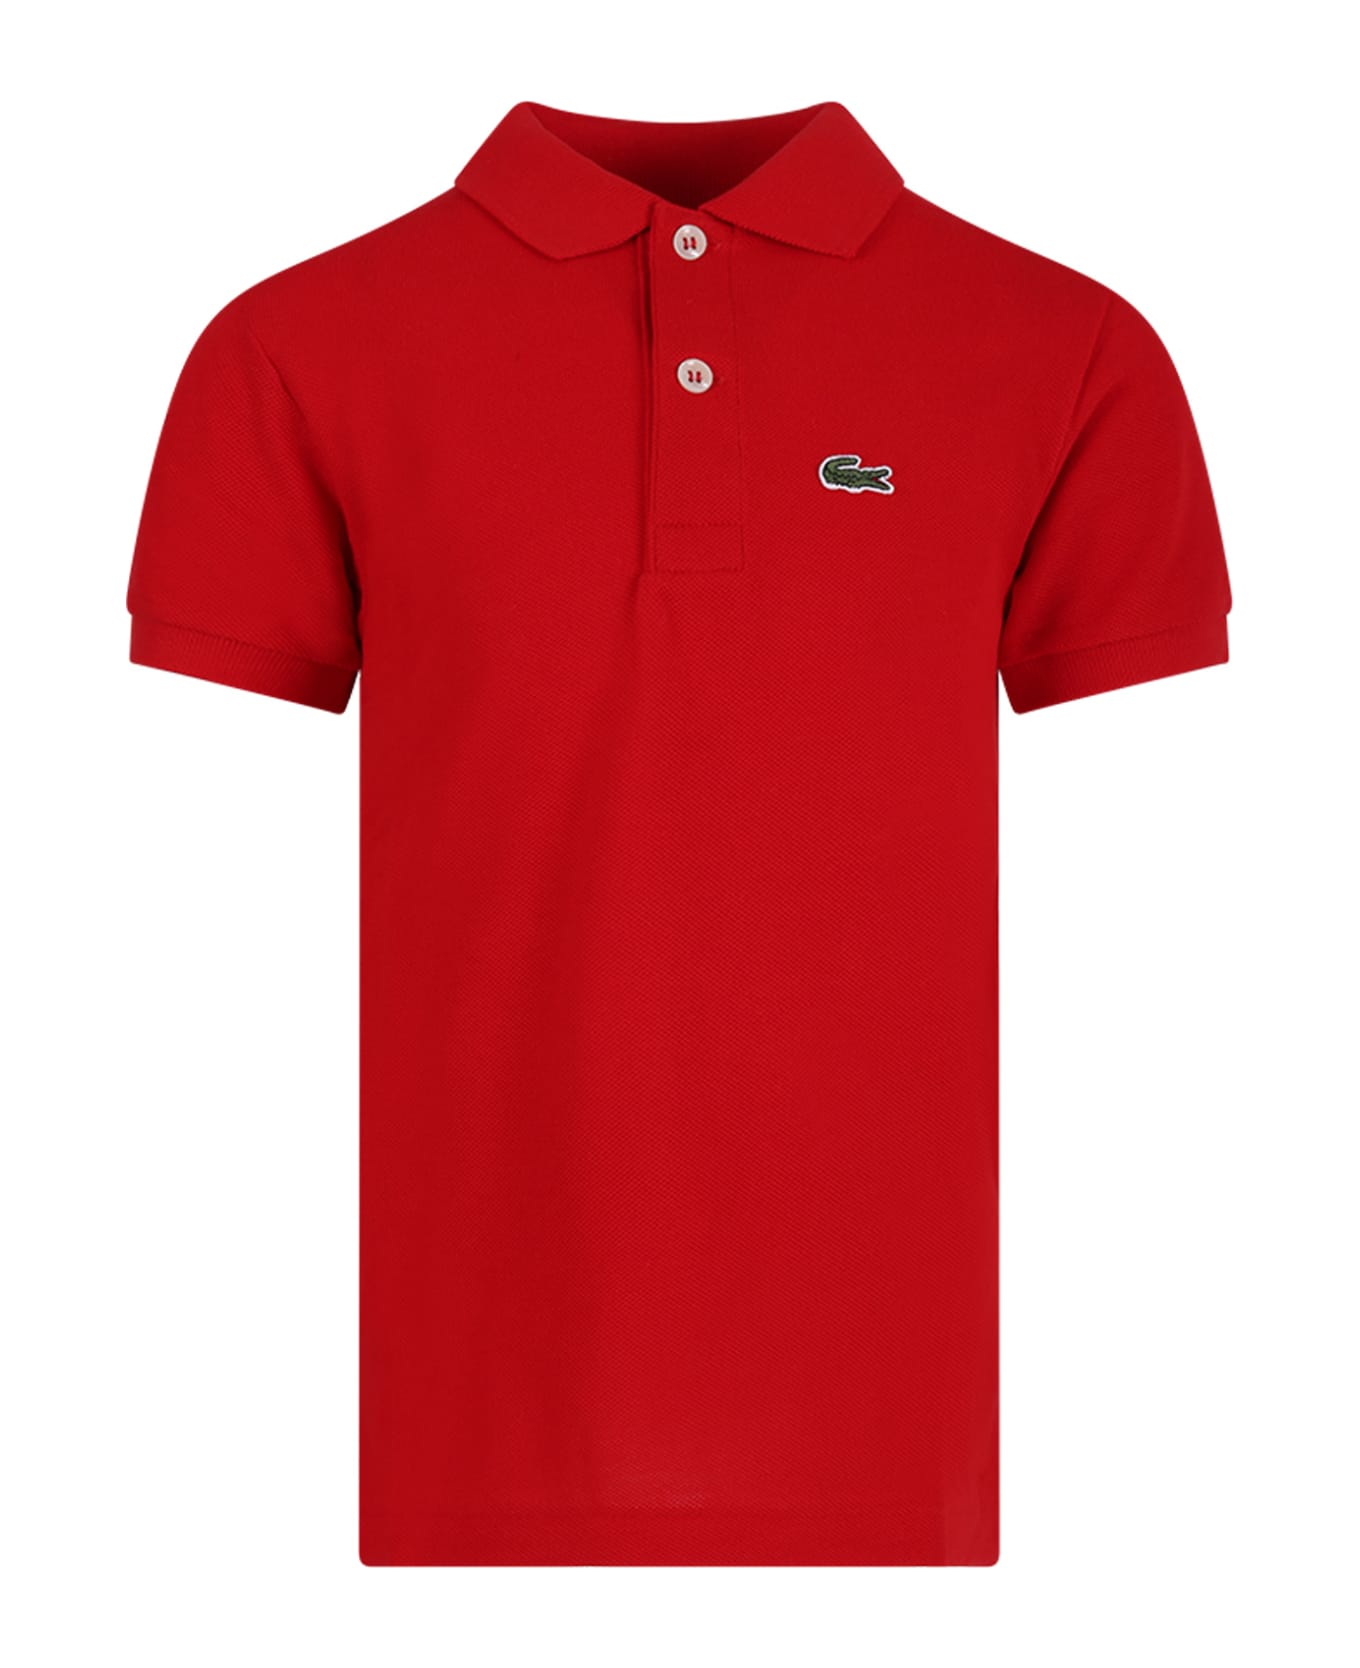 Lacoste Red Polo Shirt For Boy With Green Crocodile - Red